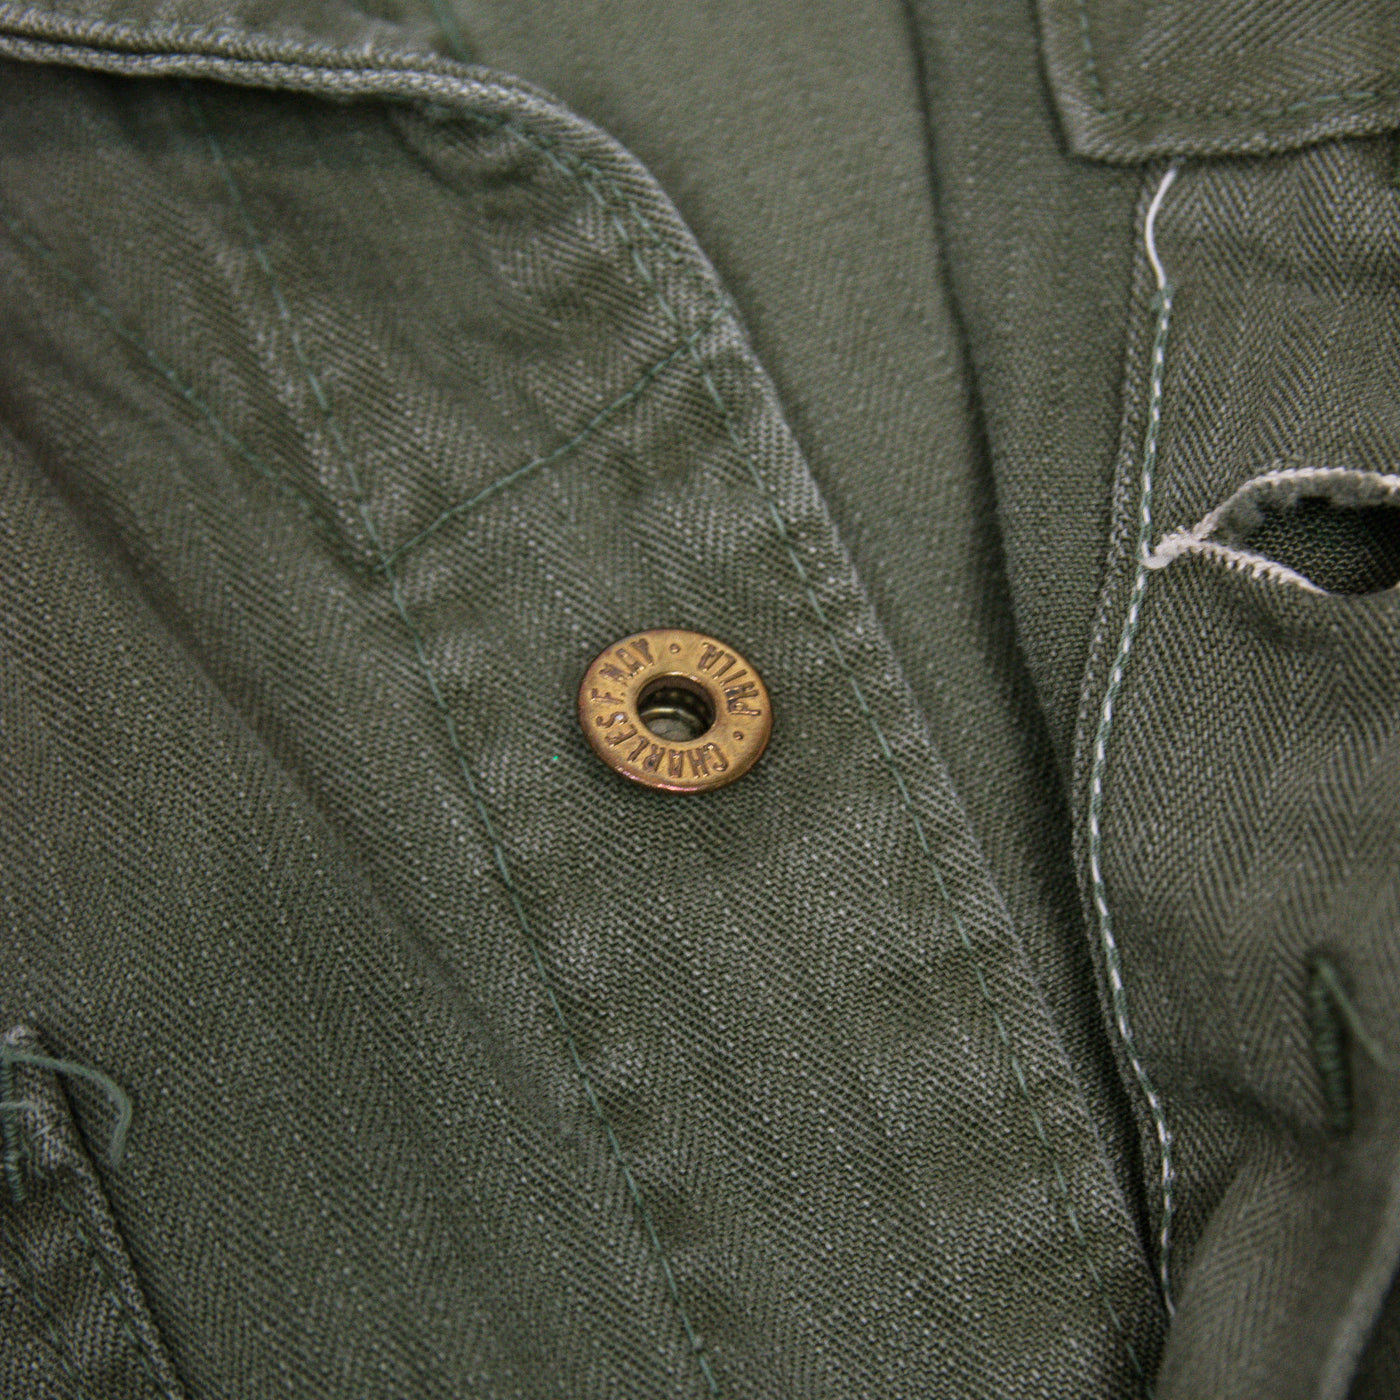 Vintage 40s US Army WWII HBT 13 Star Button Green Military Coveralls 44R L BUTTON DETAIL